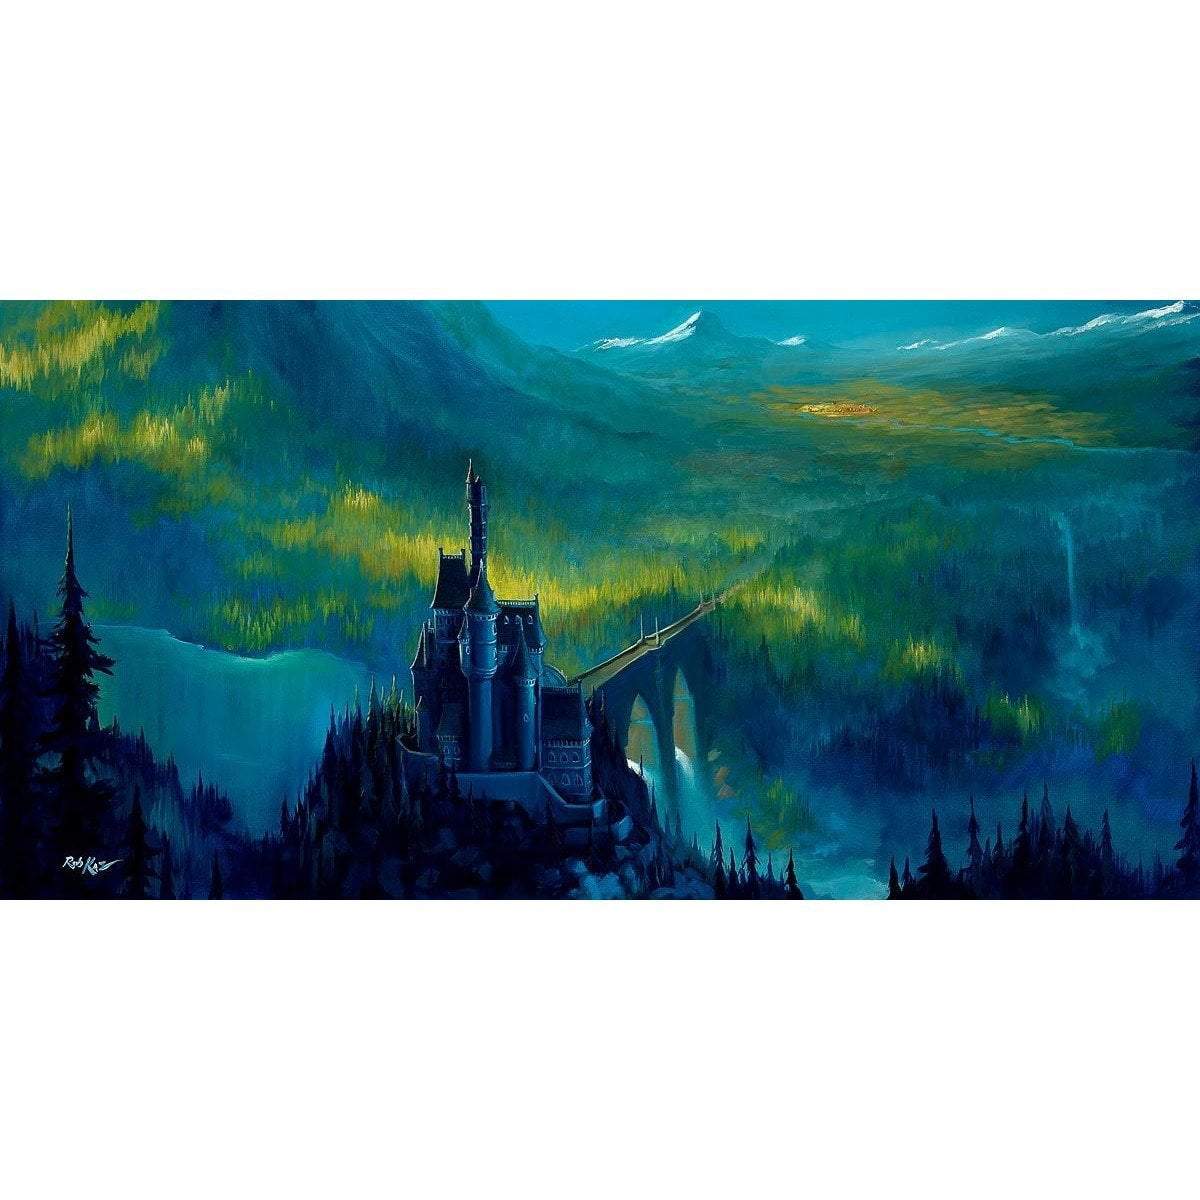 enchanted castle beauty and the beast